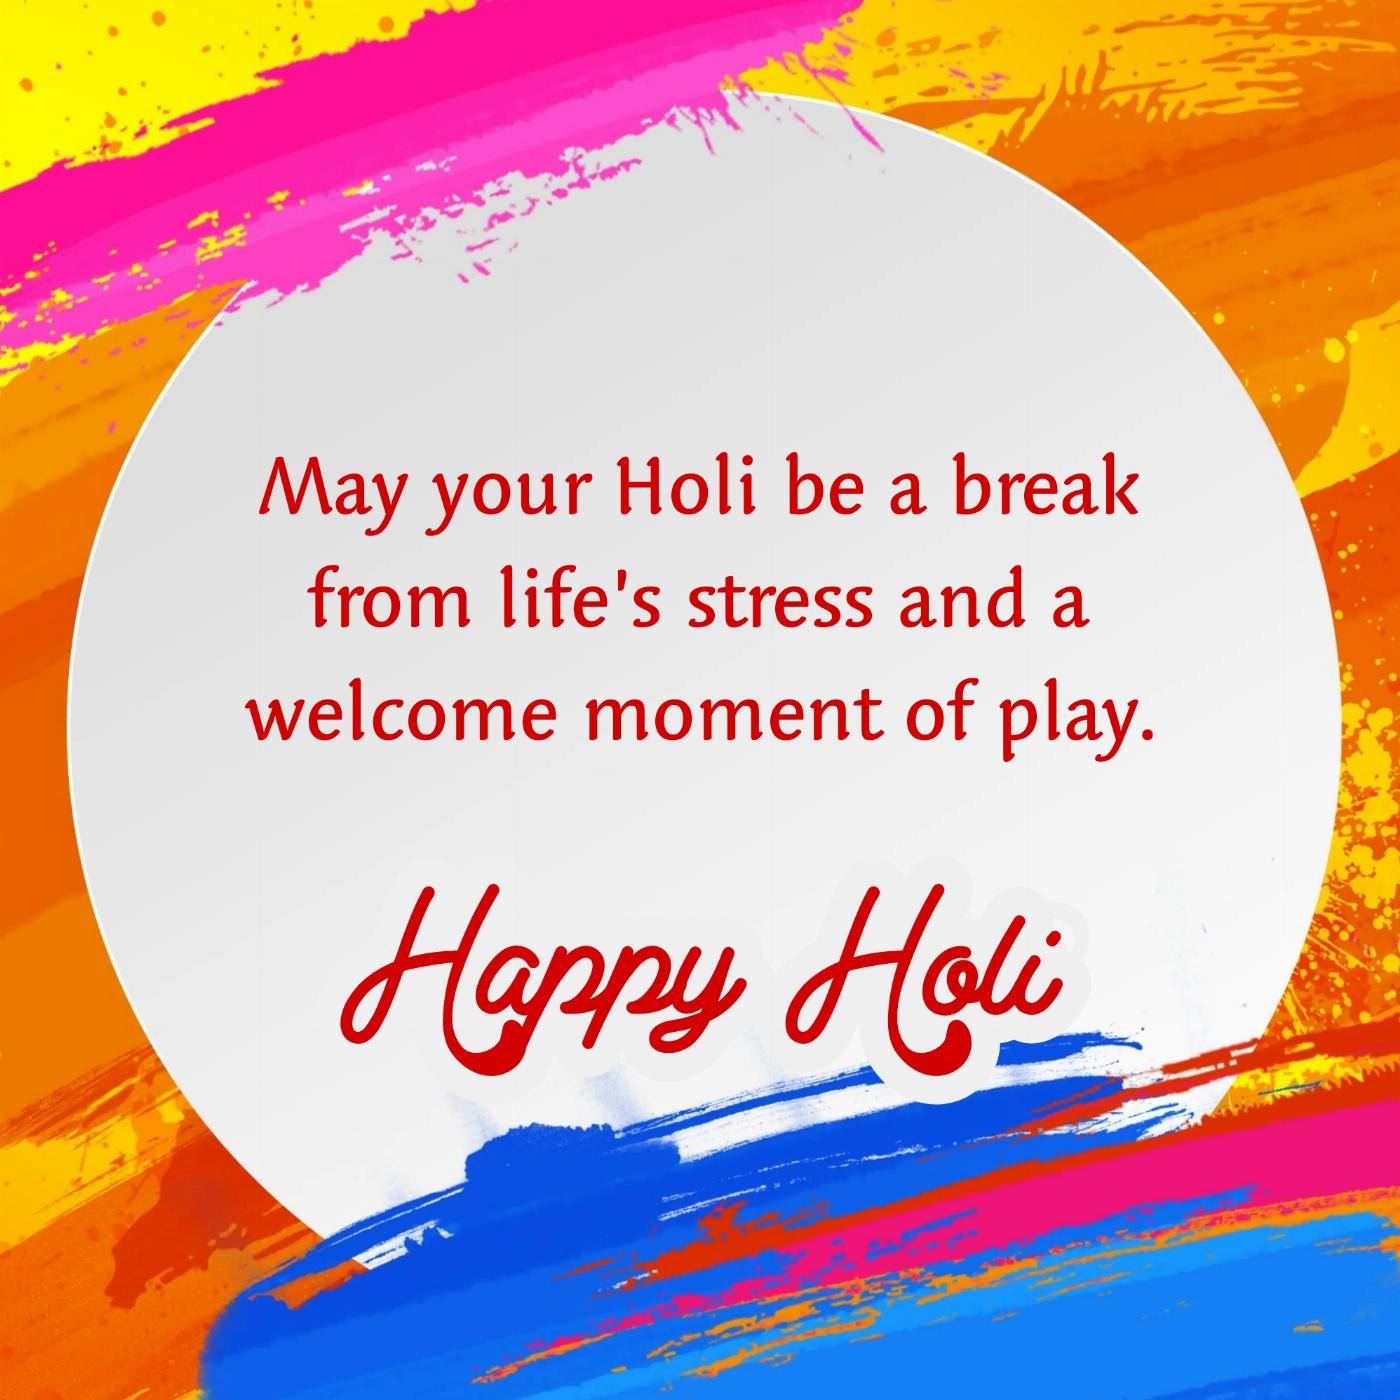 May your Holi be a break from lifes stress and a welcome moment of play